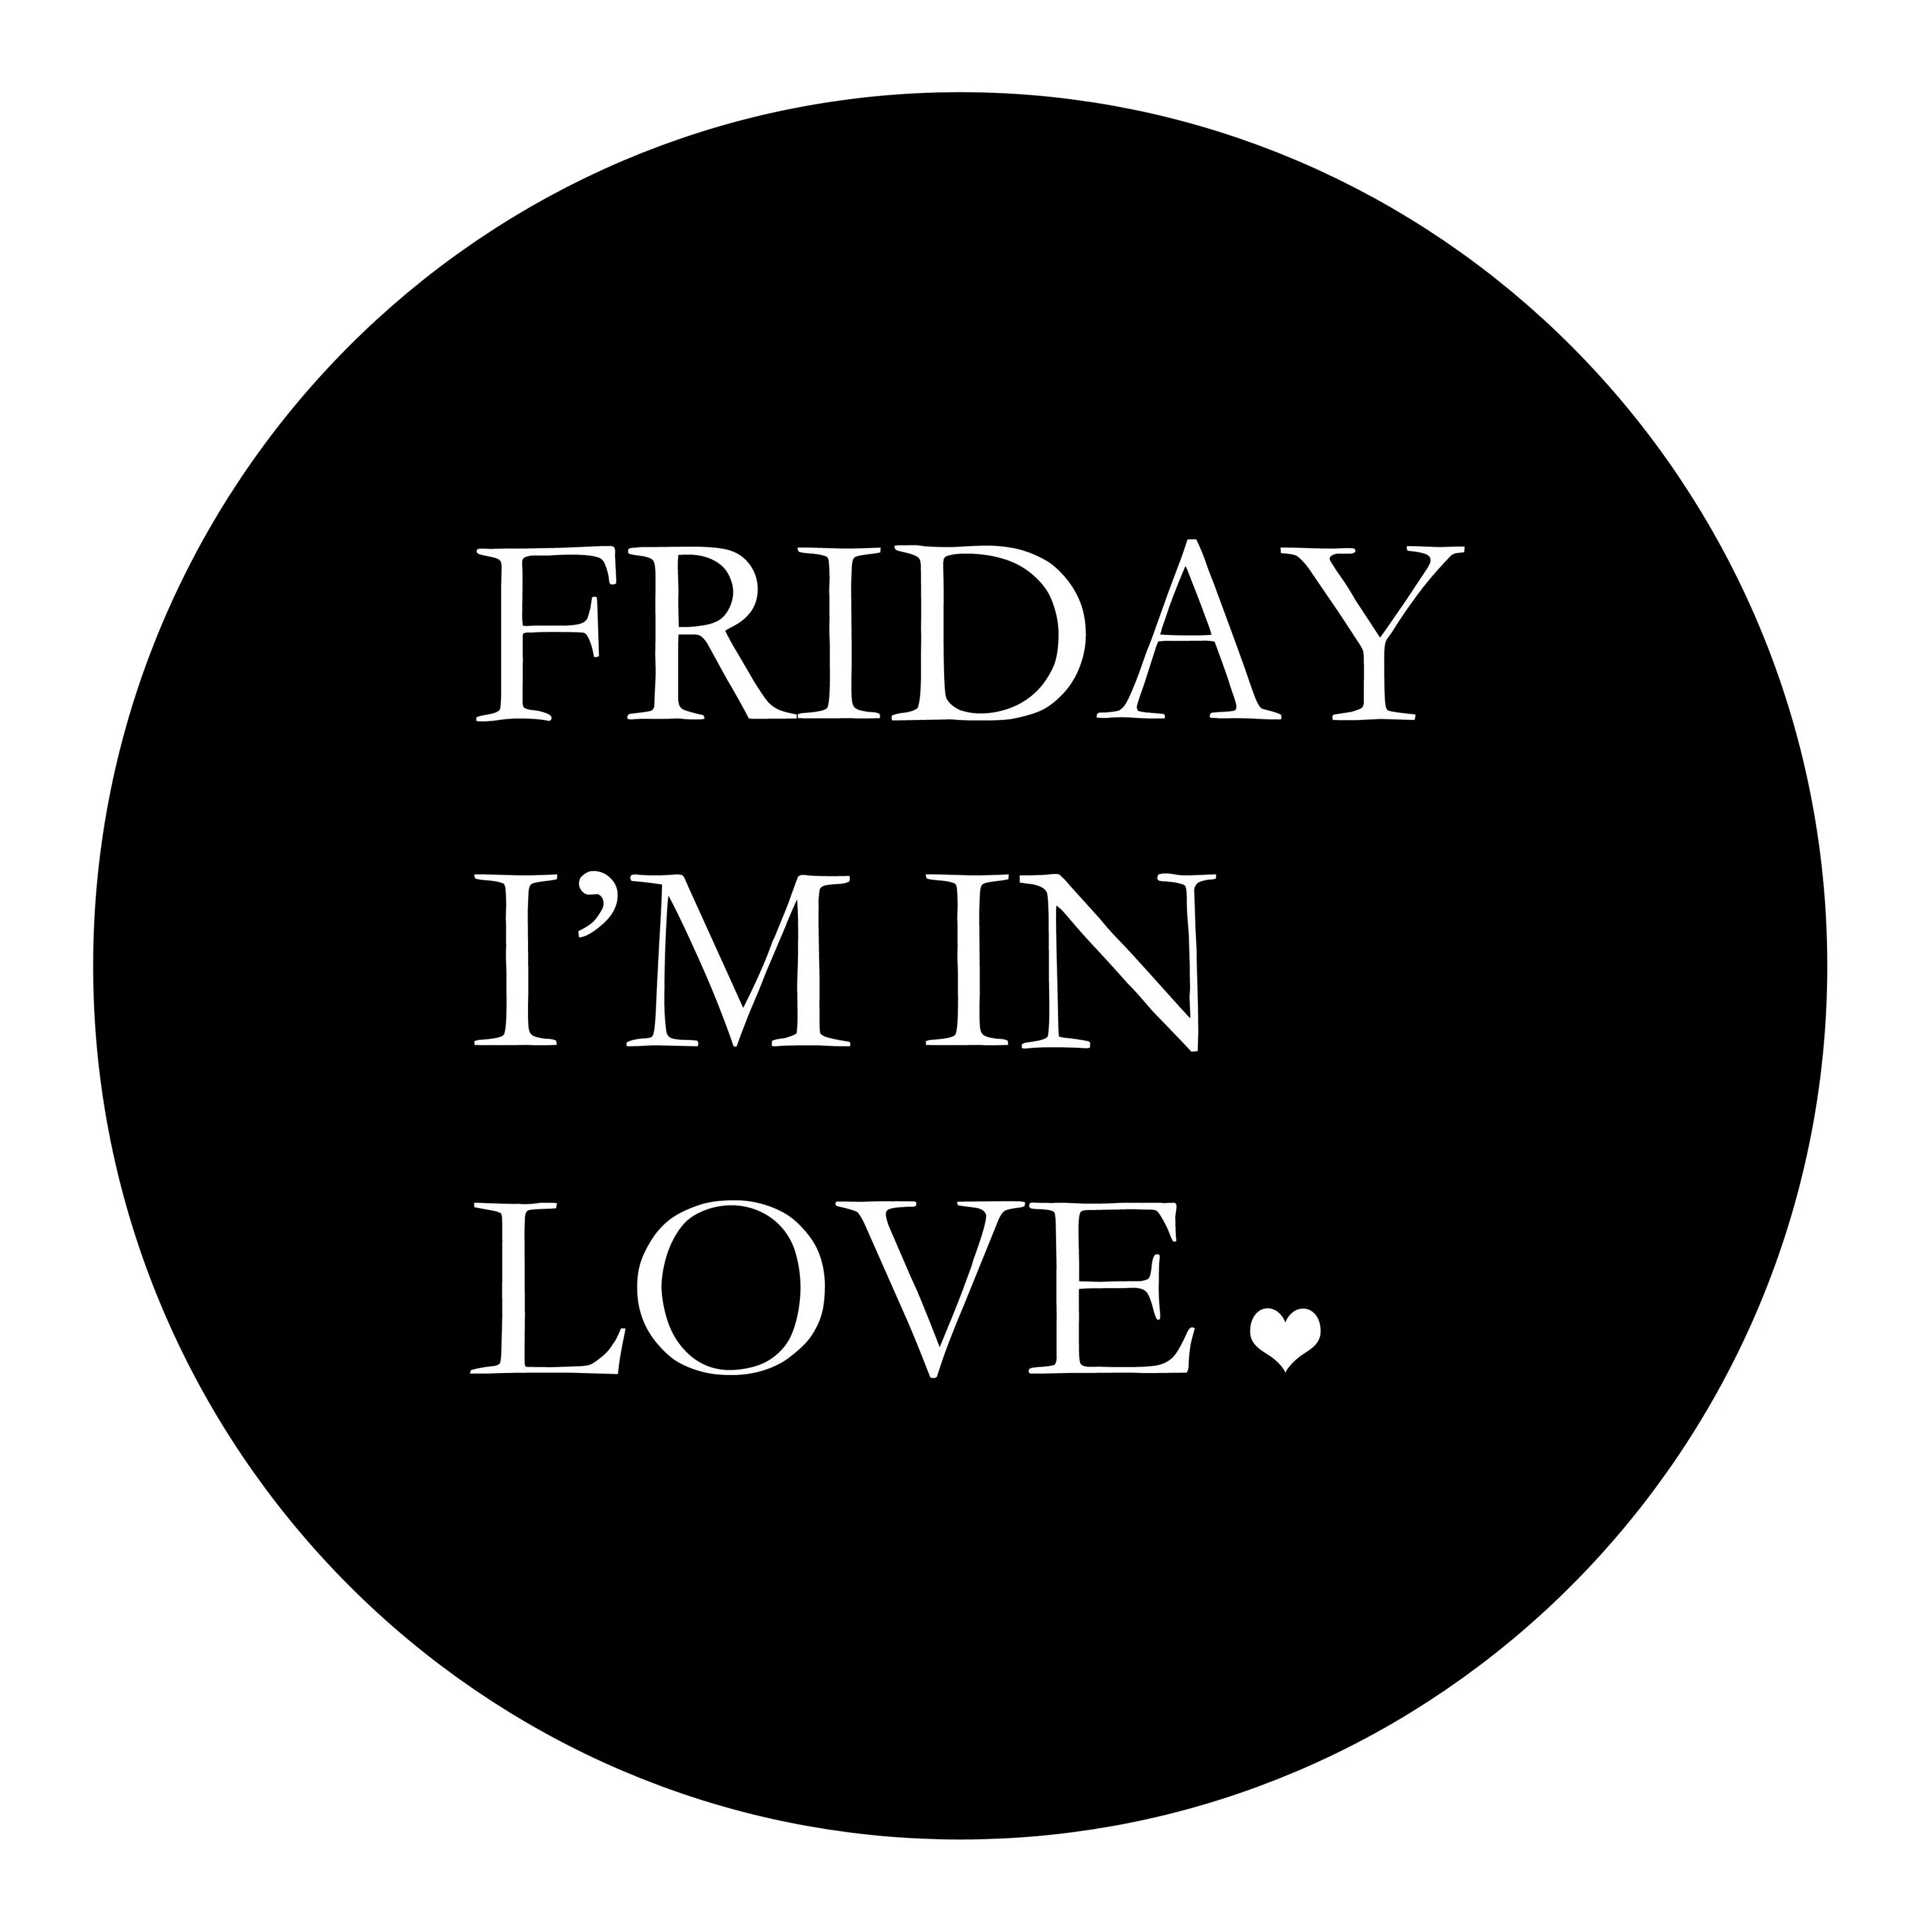 Friday i m in love the cure. Friday i/m in Love. Friday im in Love. Friday im in Love the Cure. Friday i am in Love.